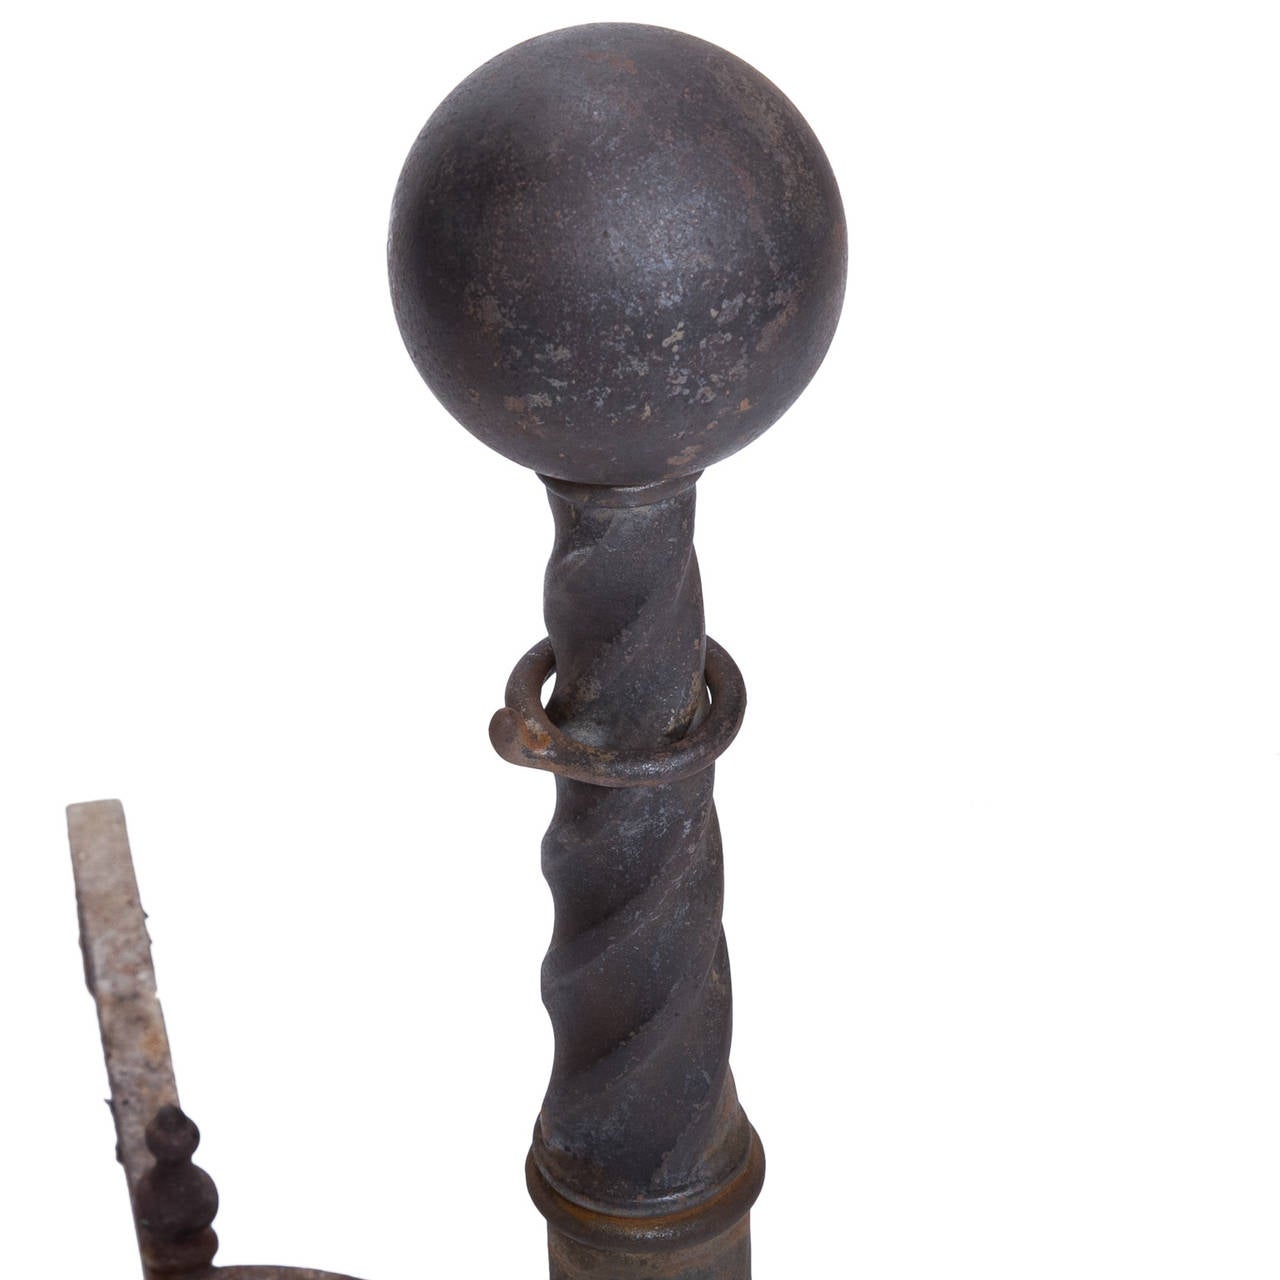 A strong pair of antique iron andirons with a decorative base leading to a twist column and cannonball top.